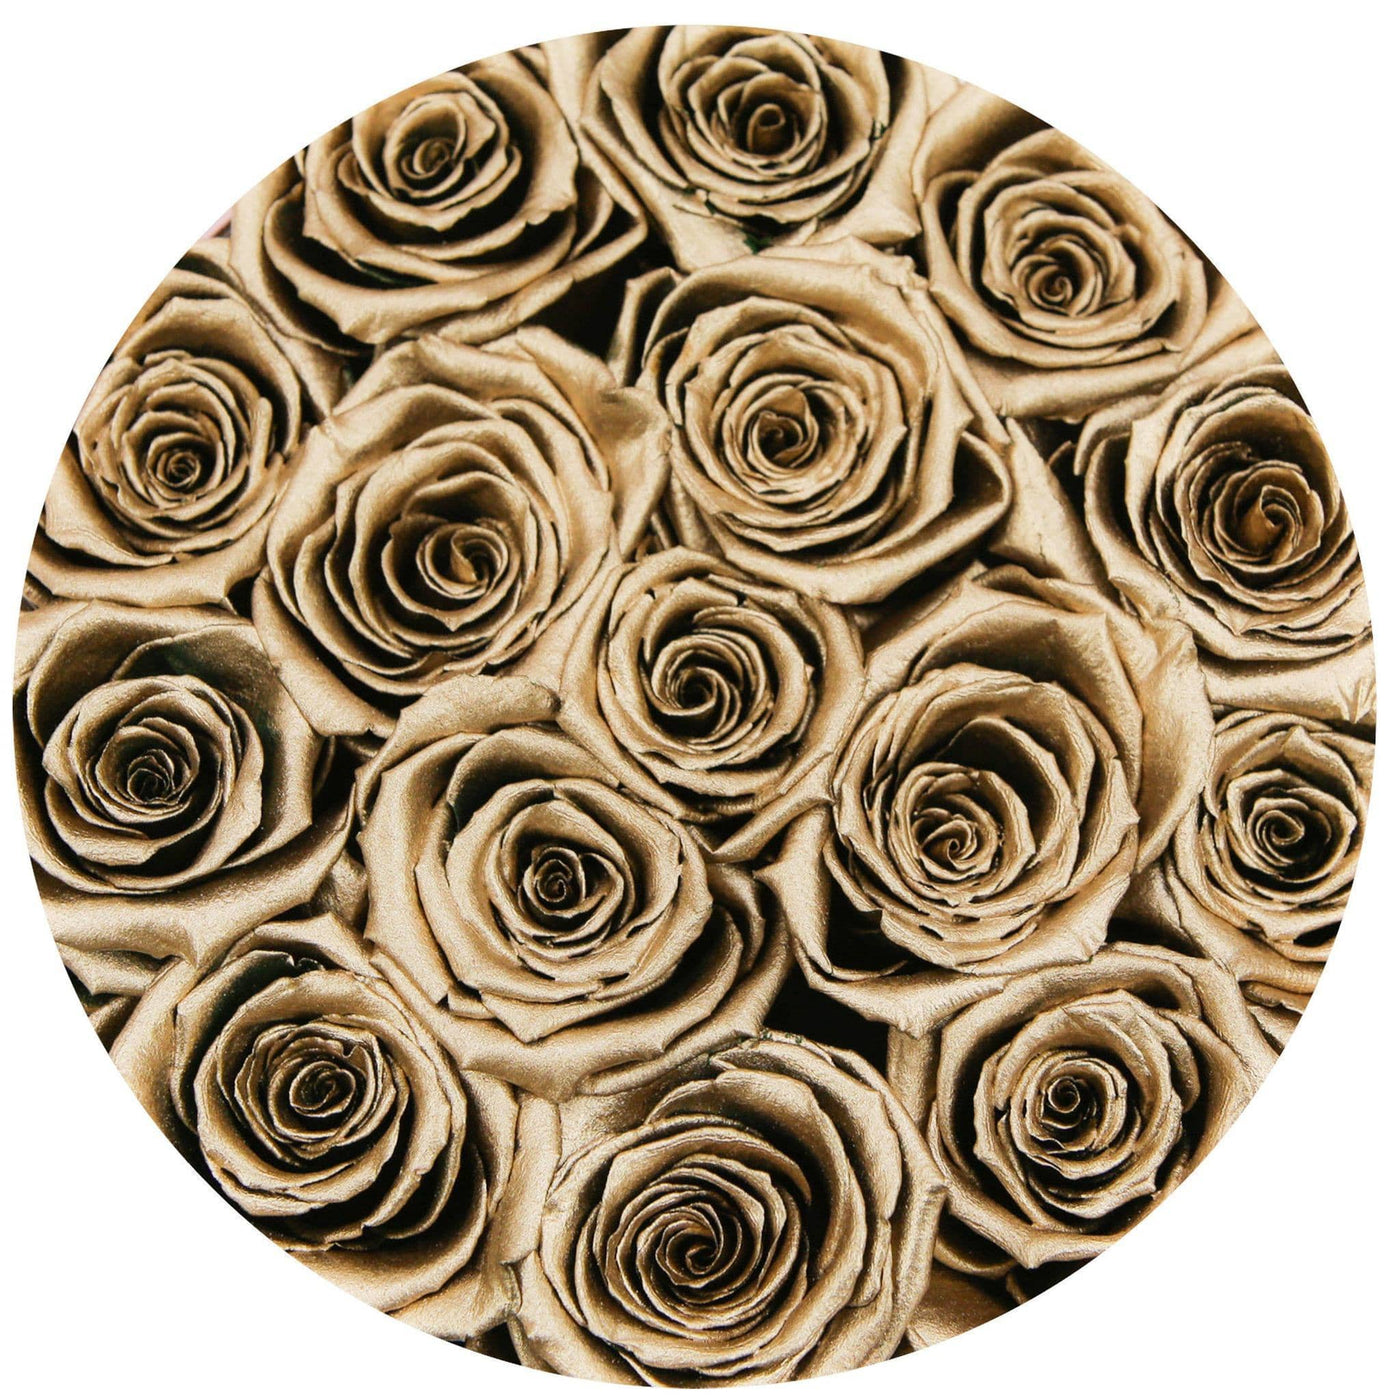 24K Gold Roses That Last A Year - Classic Rose Box